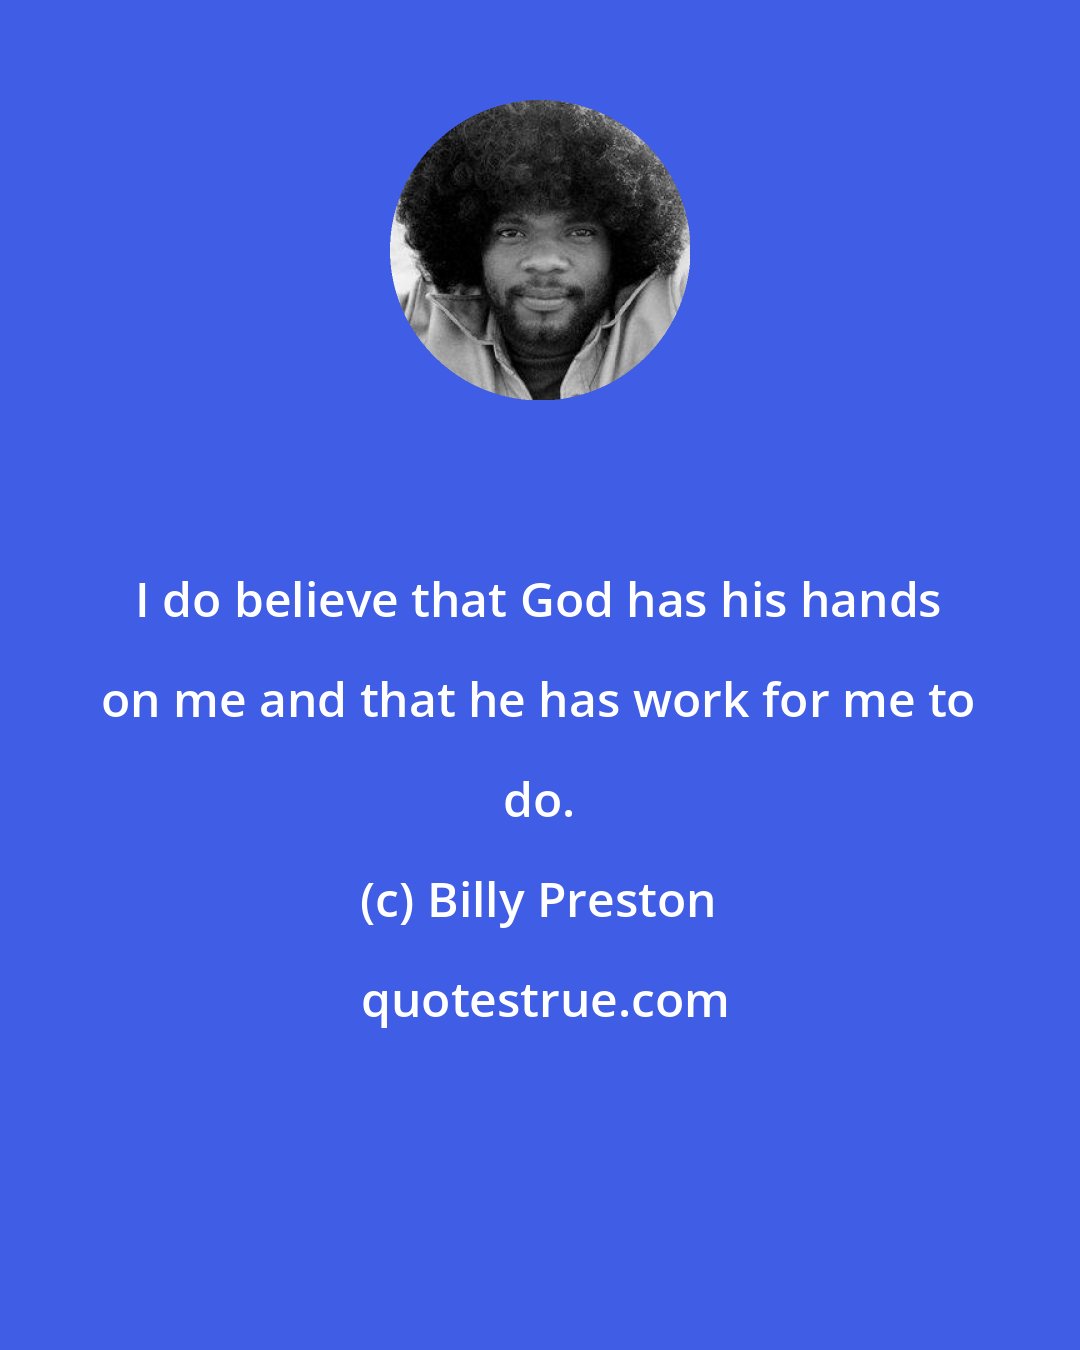 Billy Preston: I do believe that God has his hands on me and that he has work for me to do.